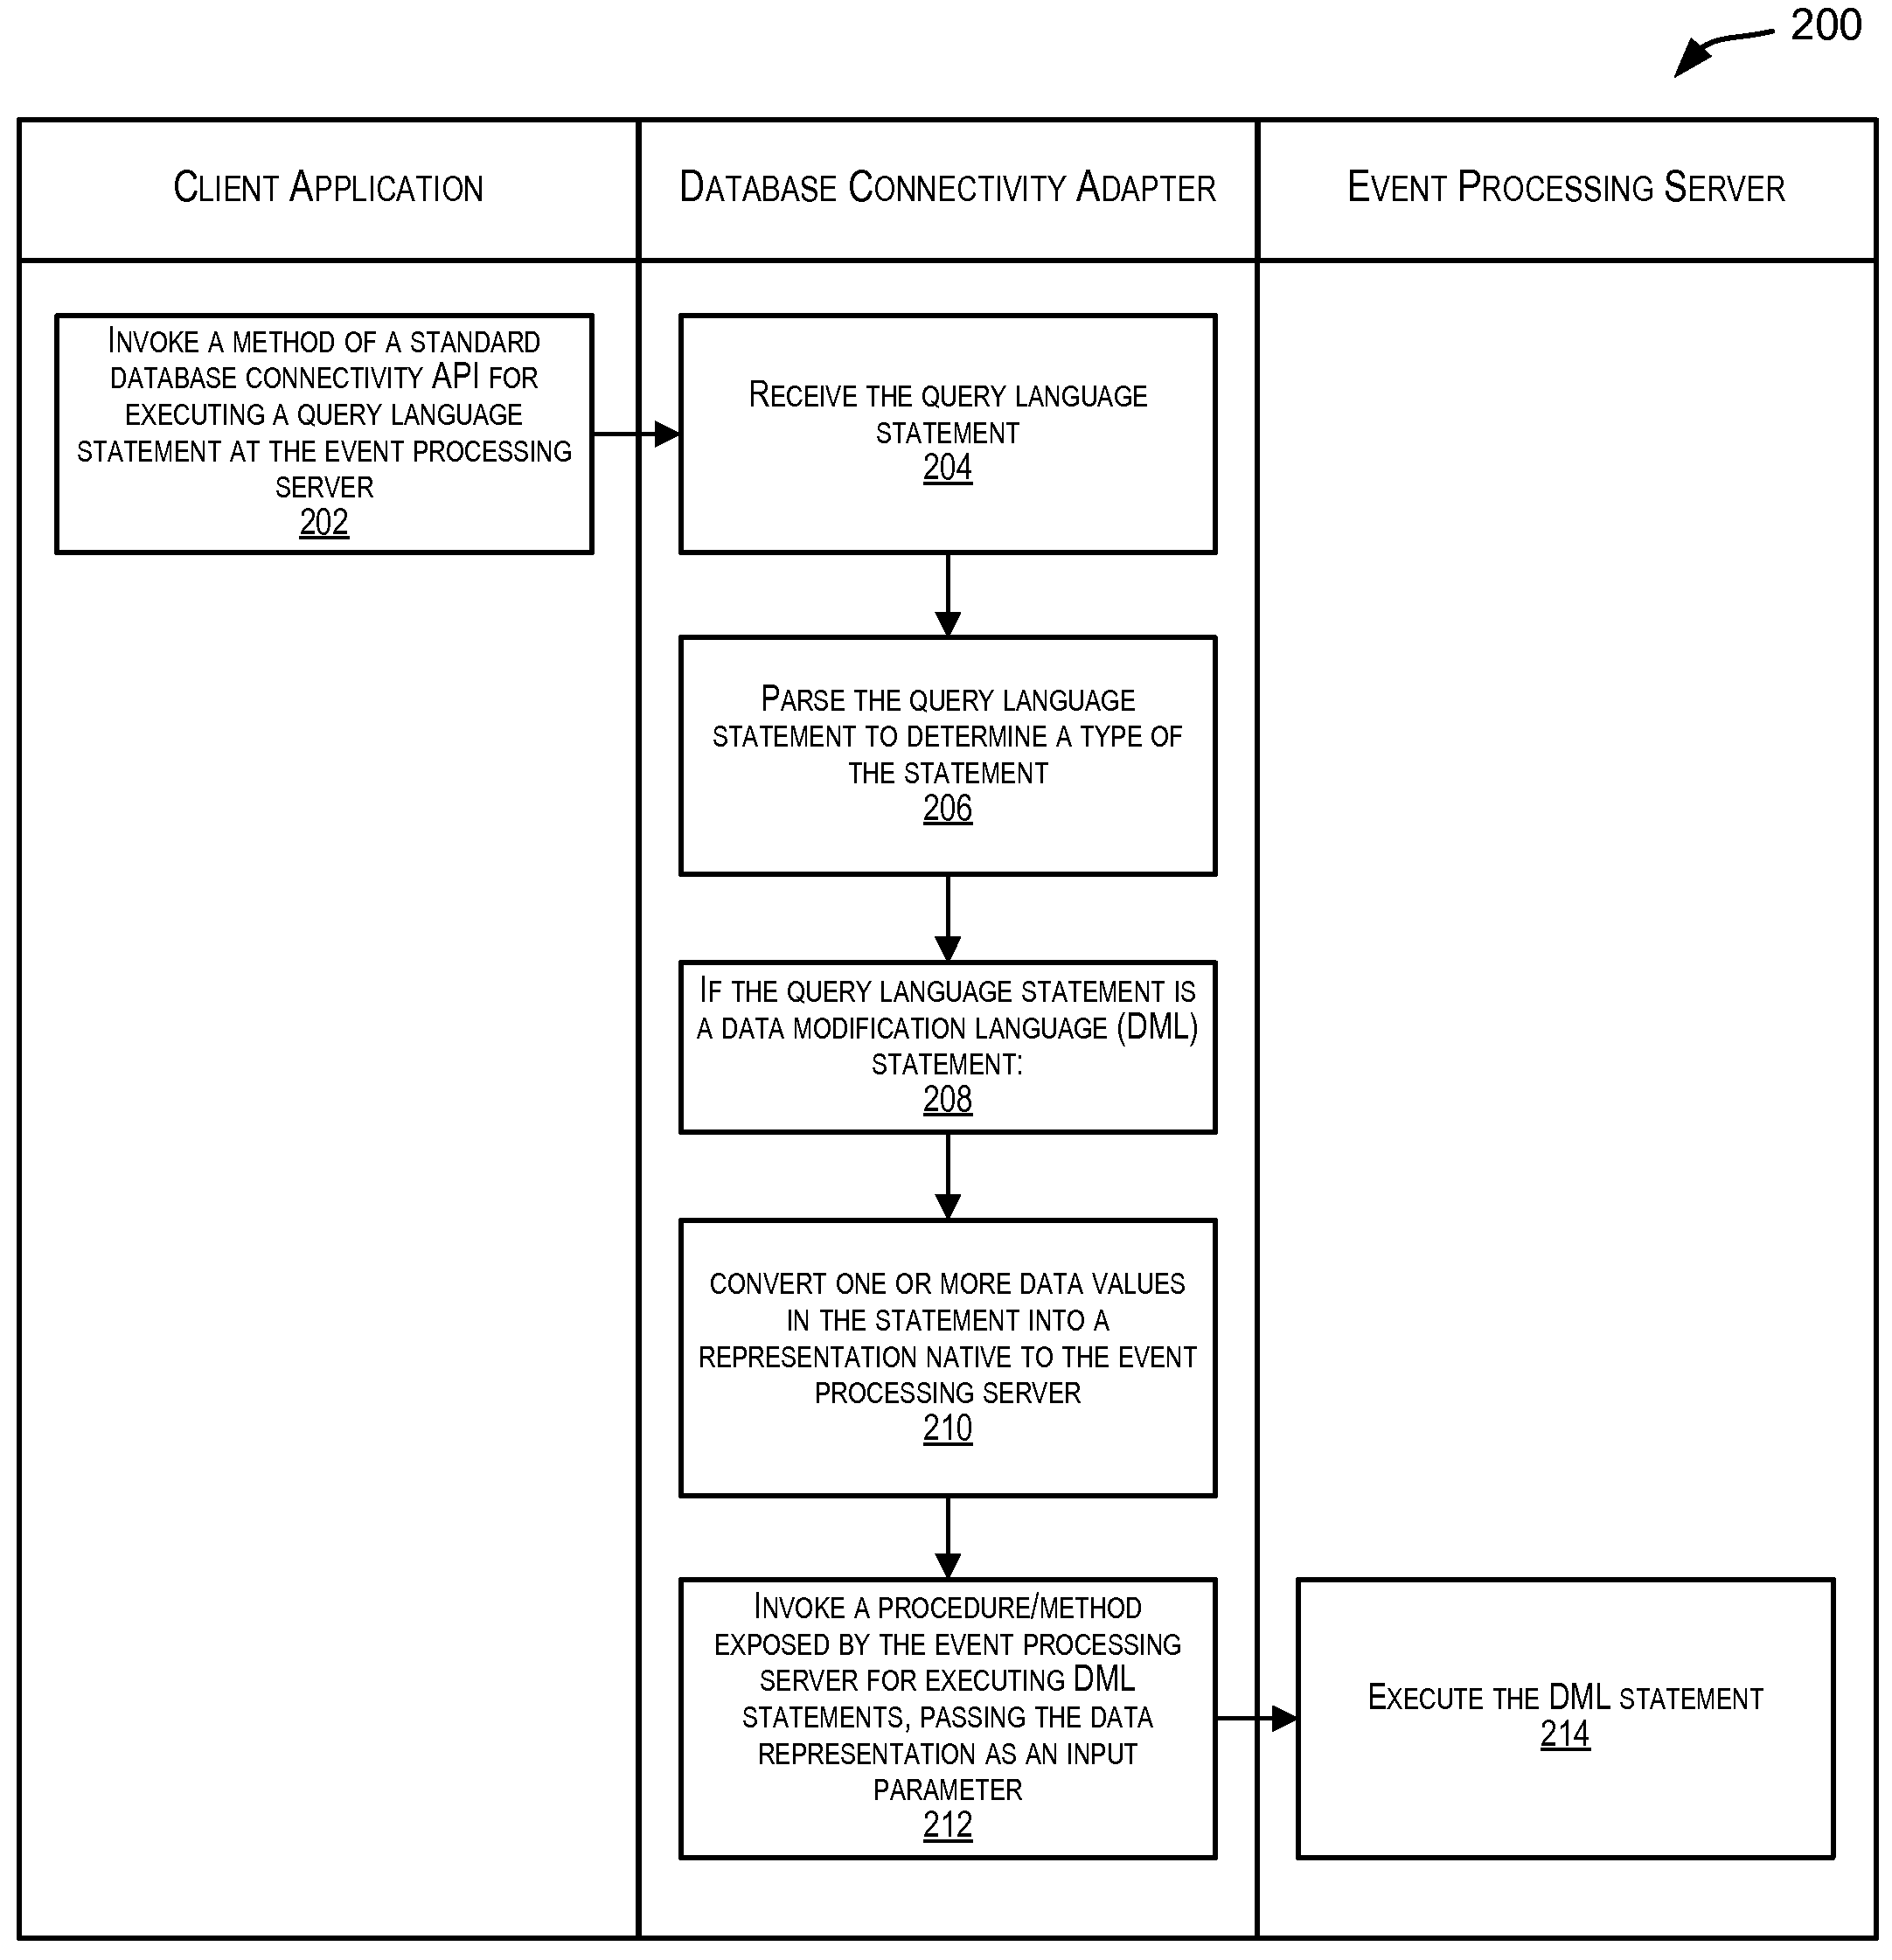 Standardized database connectivity support for an event processing server in an embedded context